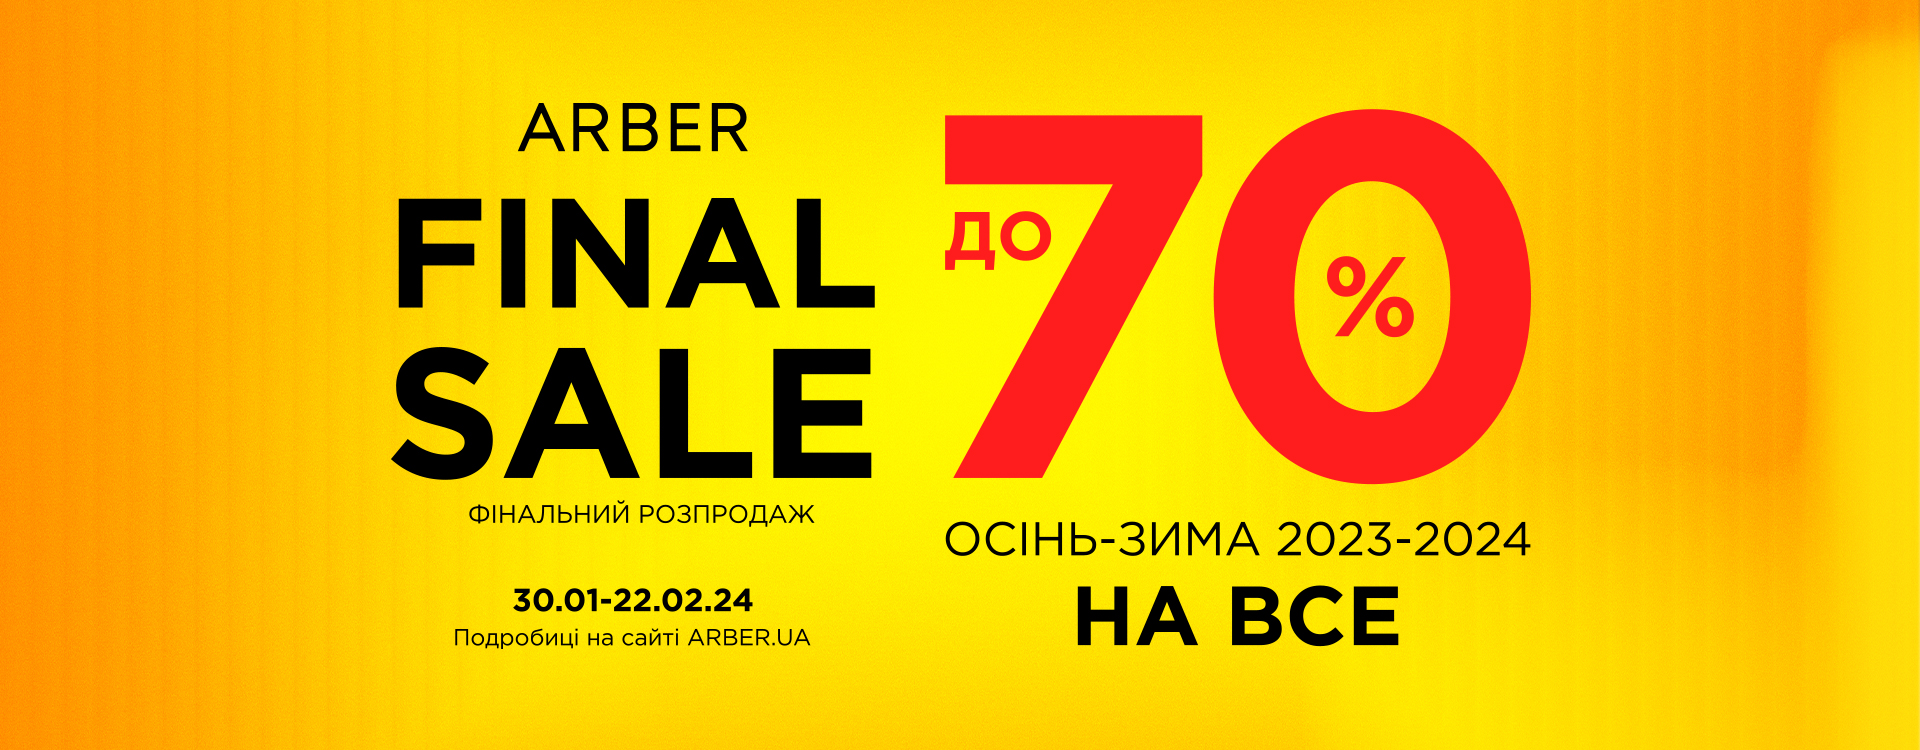 Final sale at ARBER with discounts up to -70%